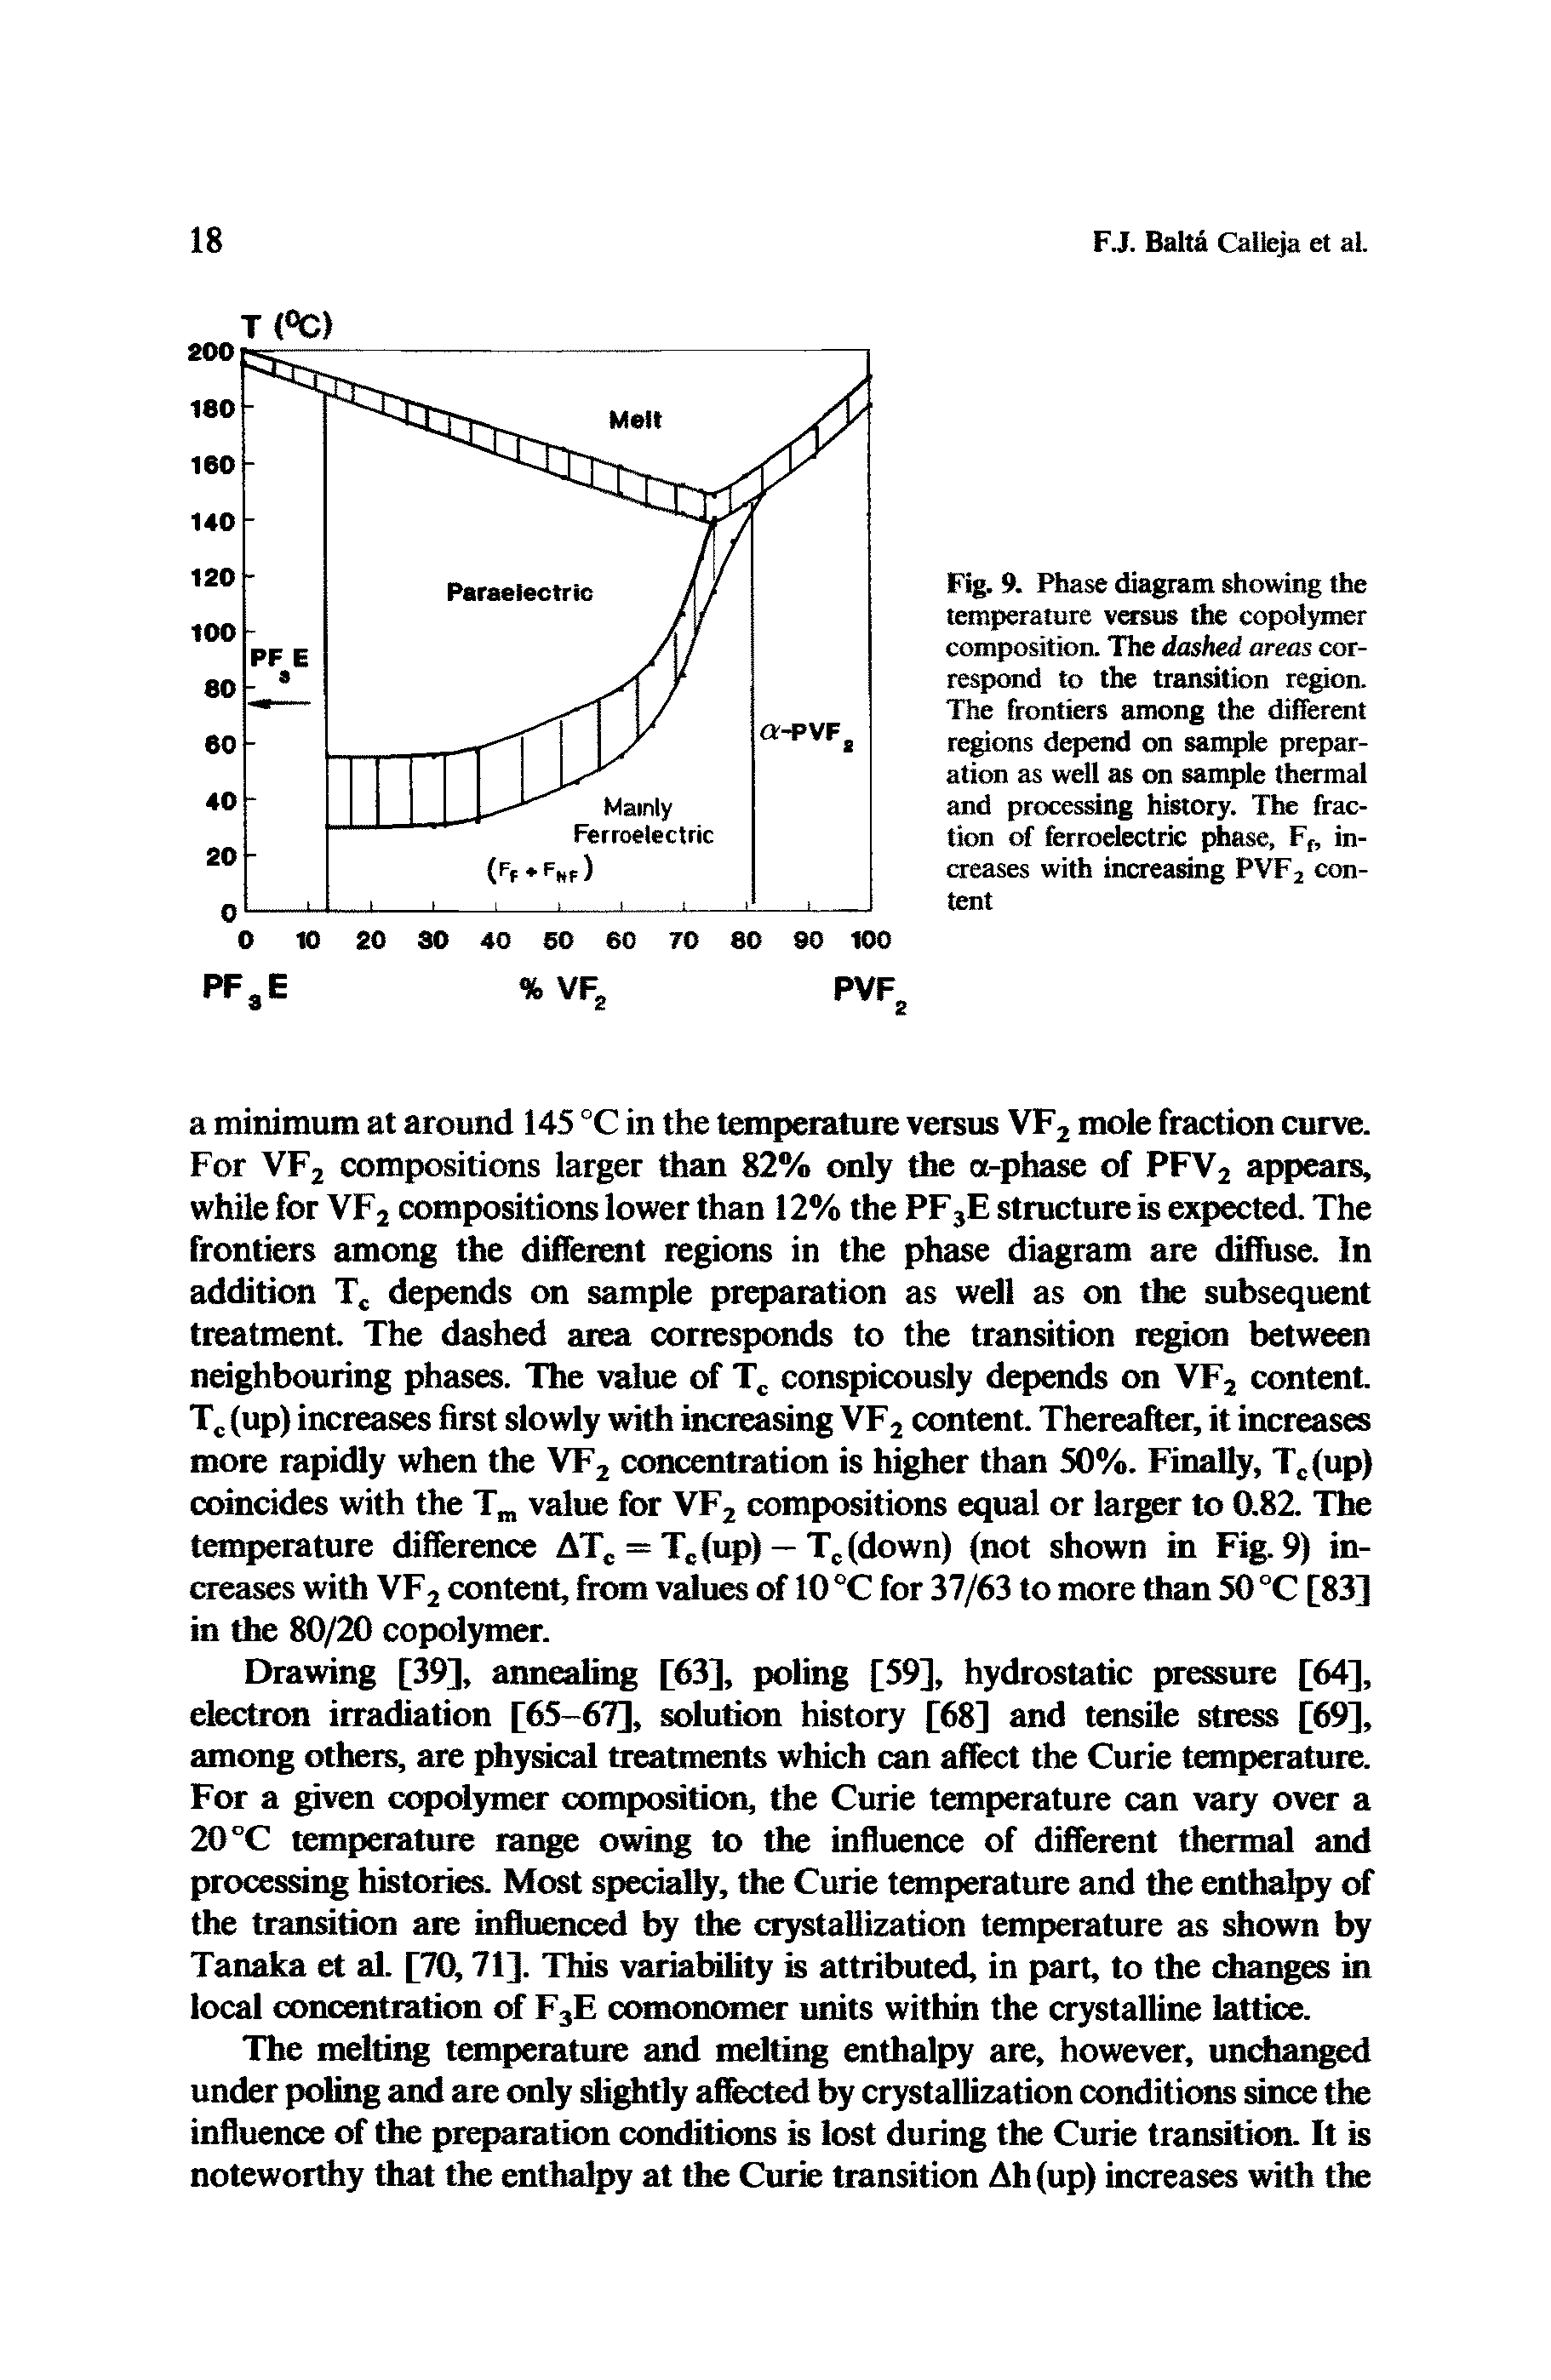 Fig. 9. Phase diagram showing the temperature versus the copolymer composition. The dashed areas correspond to the transition region. The frontiers among the different regions depend on sample preparation as well as on sample thermal and processing history. The fraction of ferroelectric phase, Ff, increases with increasing PVF2 content...